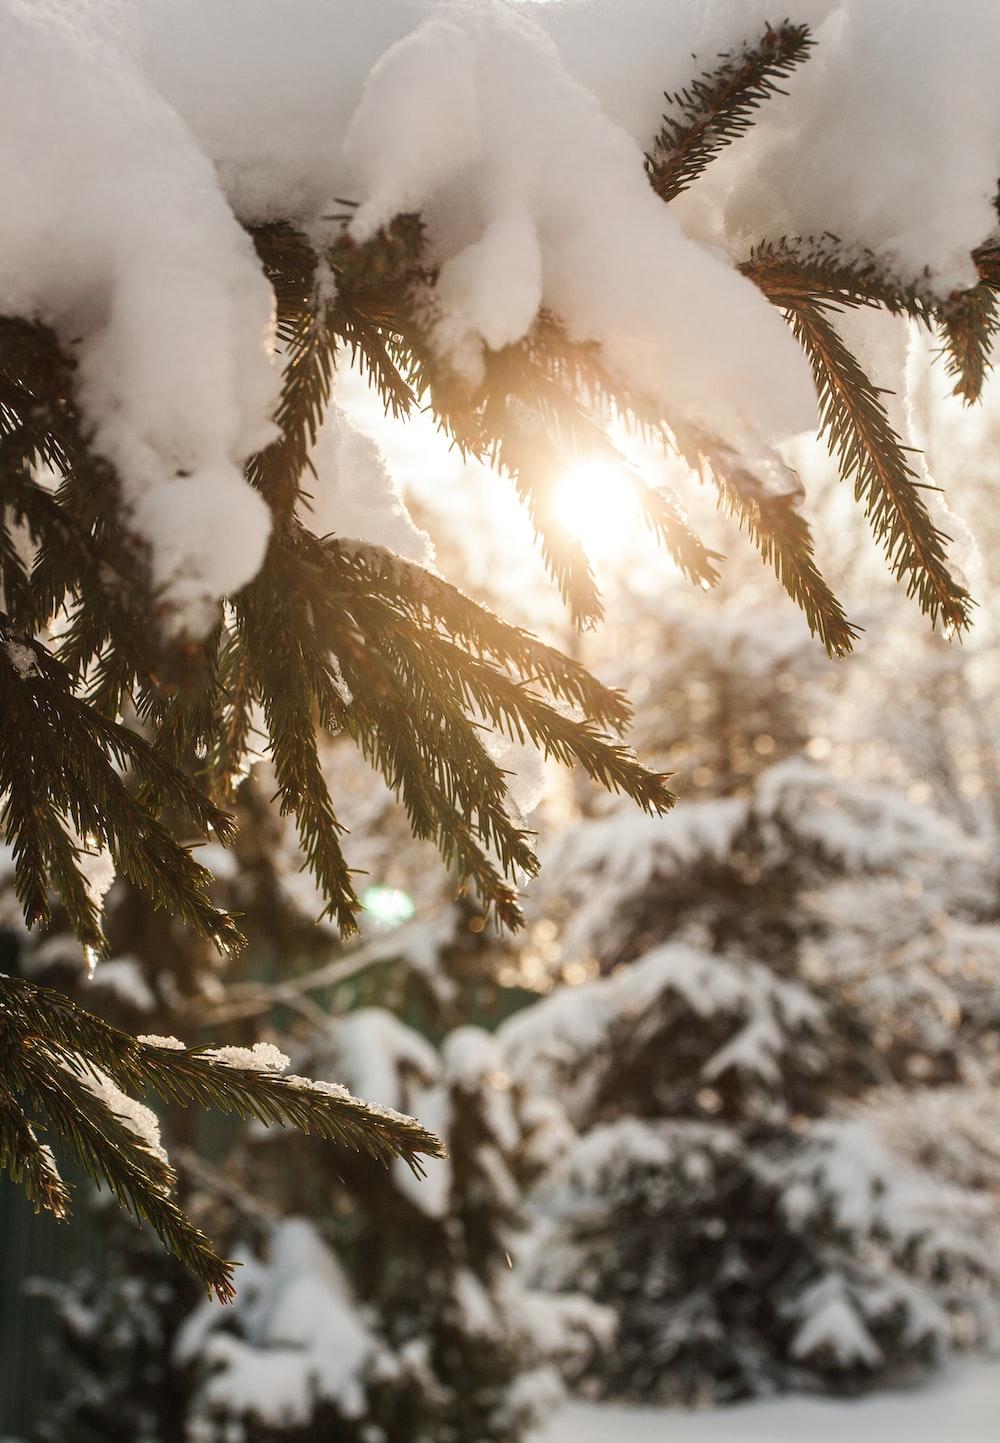 Green Pine Tree Covered With Snow Photo Winter Image On